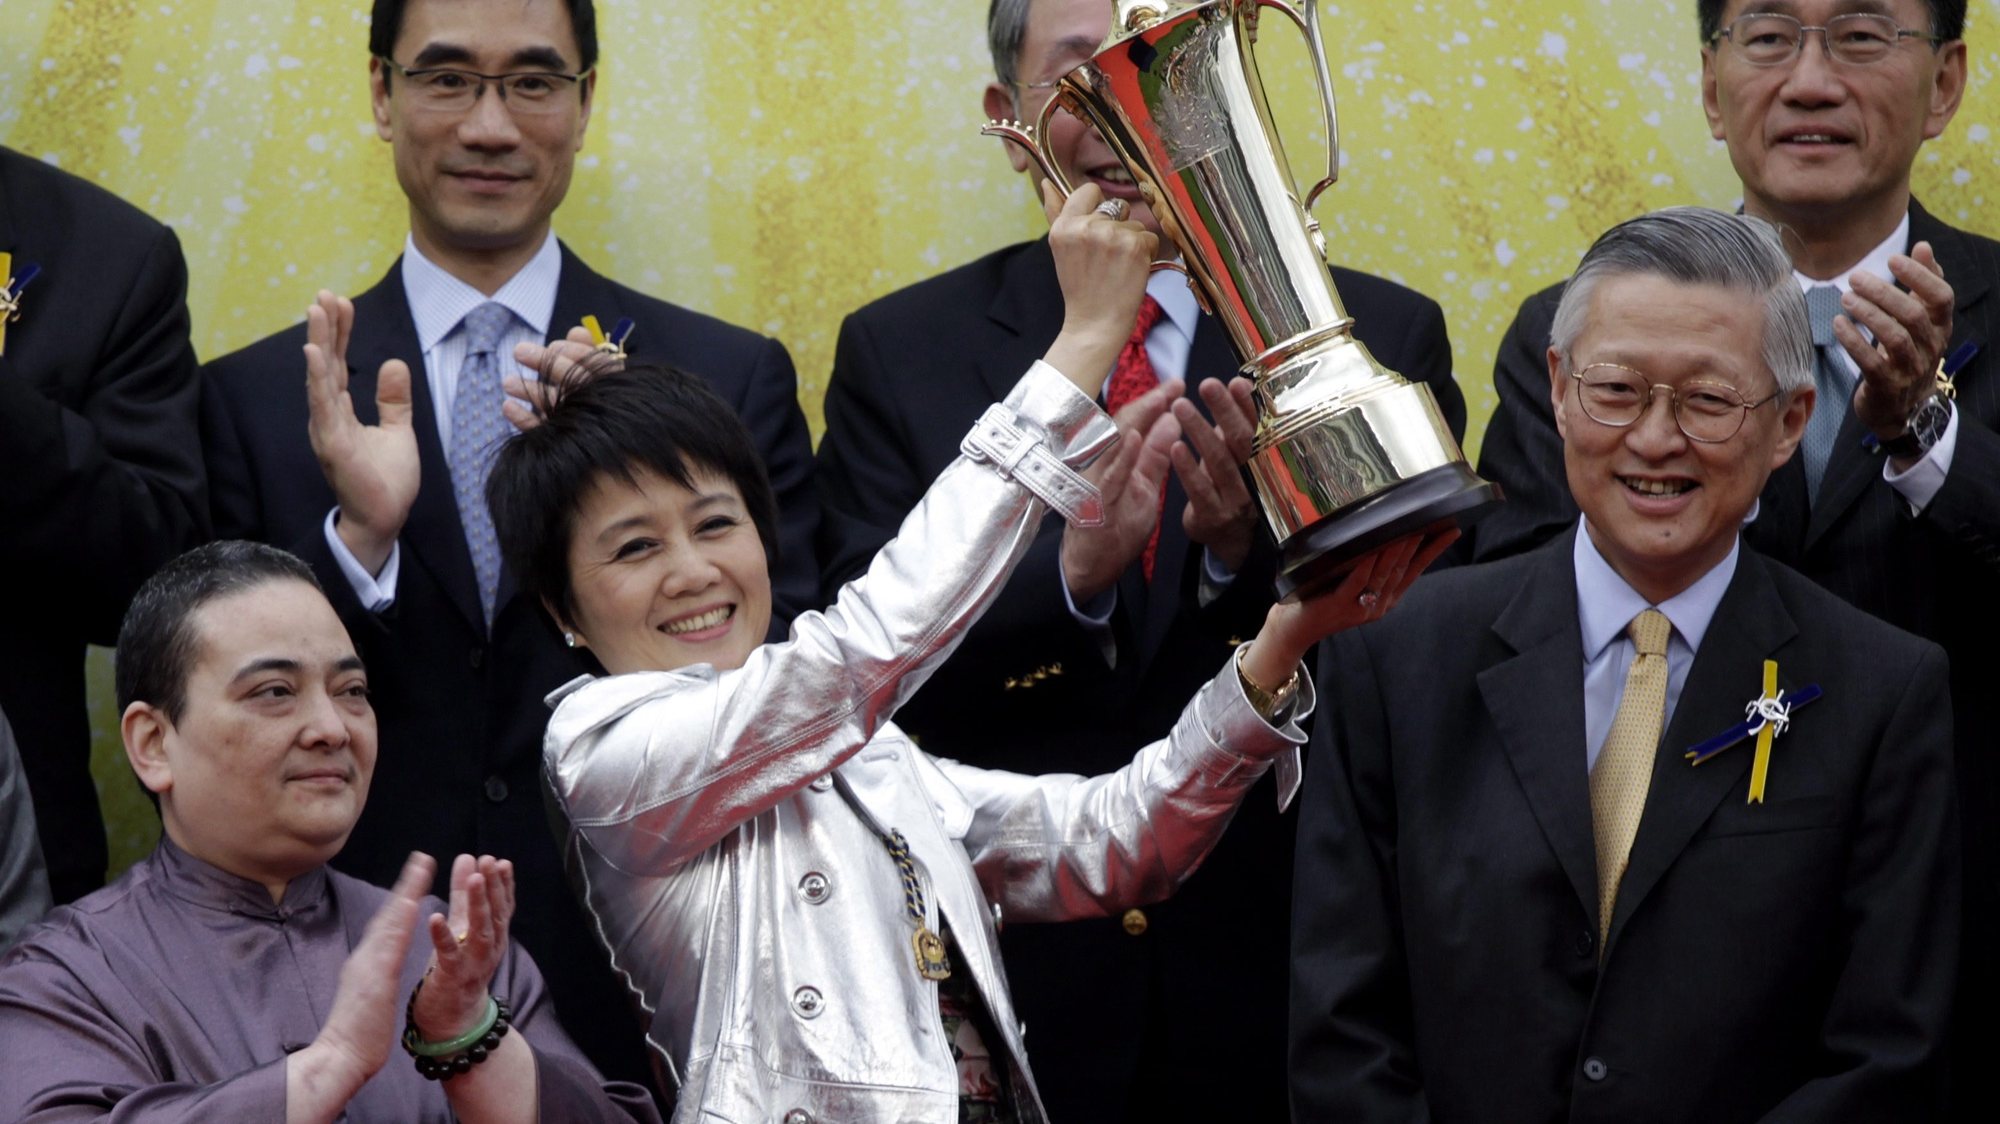 epa02131016 Horse owner Macau tycoon Stanley Ho&#039;s wife Angel (C) a showiing the trophy after hre horse Viva Pataca won the QEII Cup at the Shatin race track, during the horse races in Hong Kong, China 25 April 2010.  EPA/YM YIK